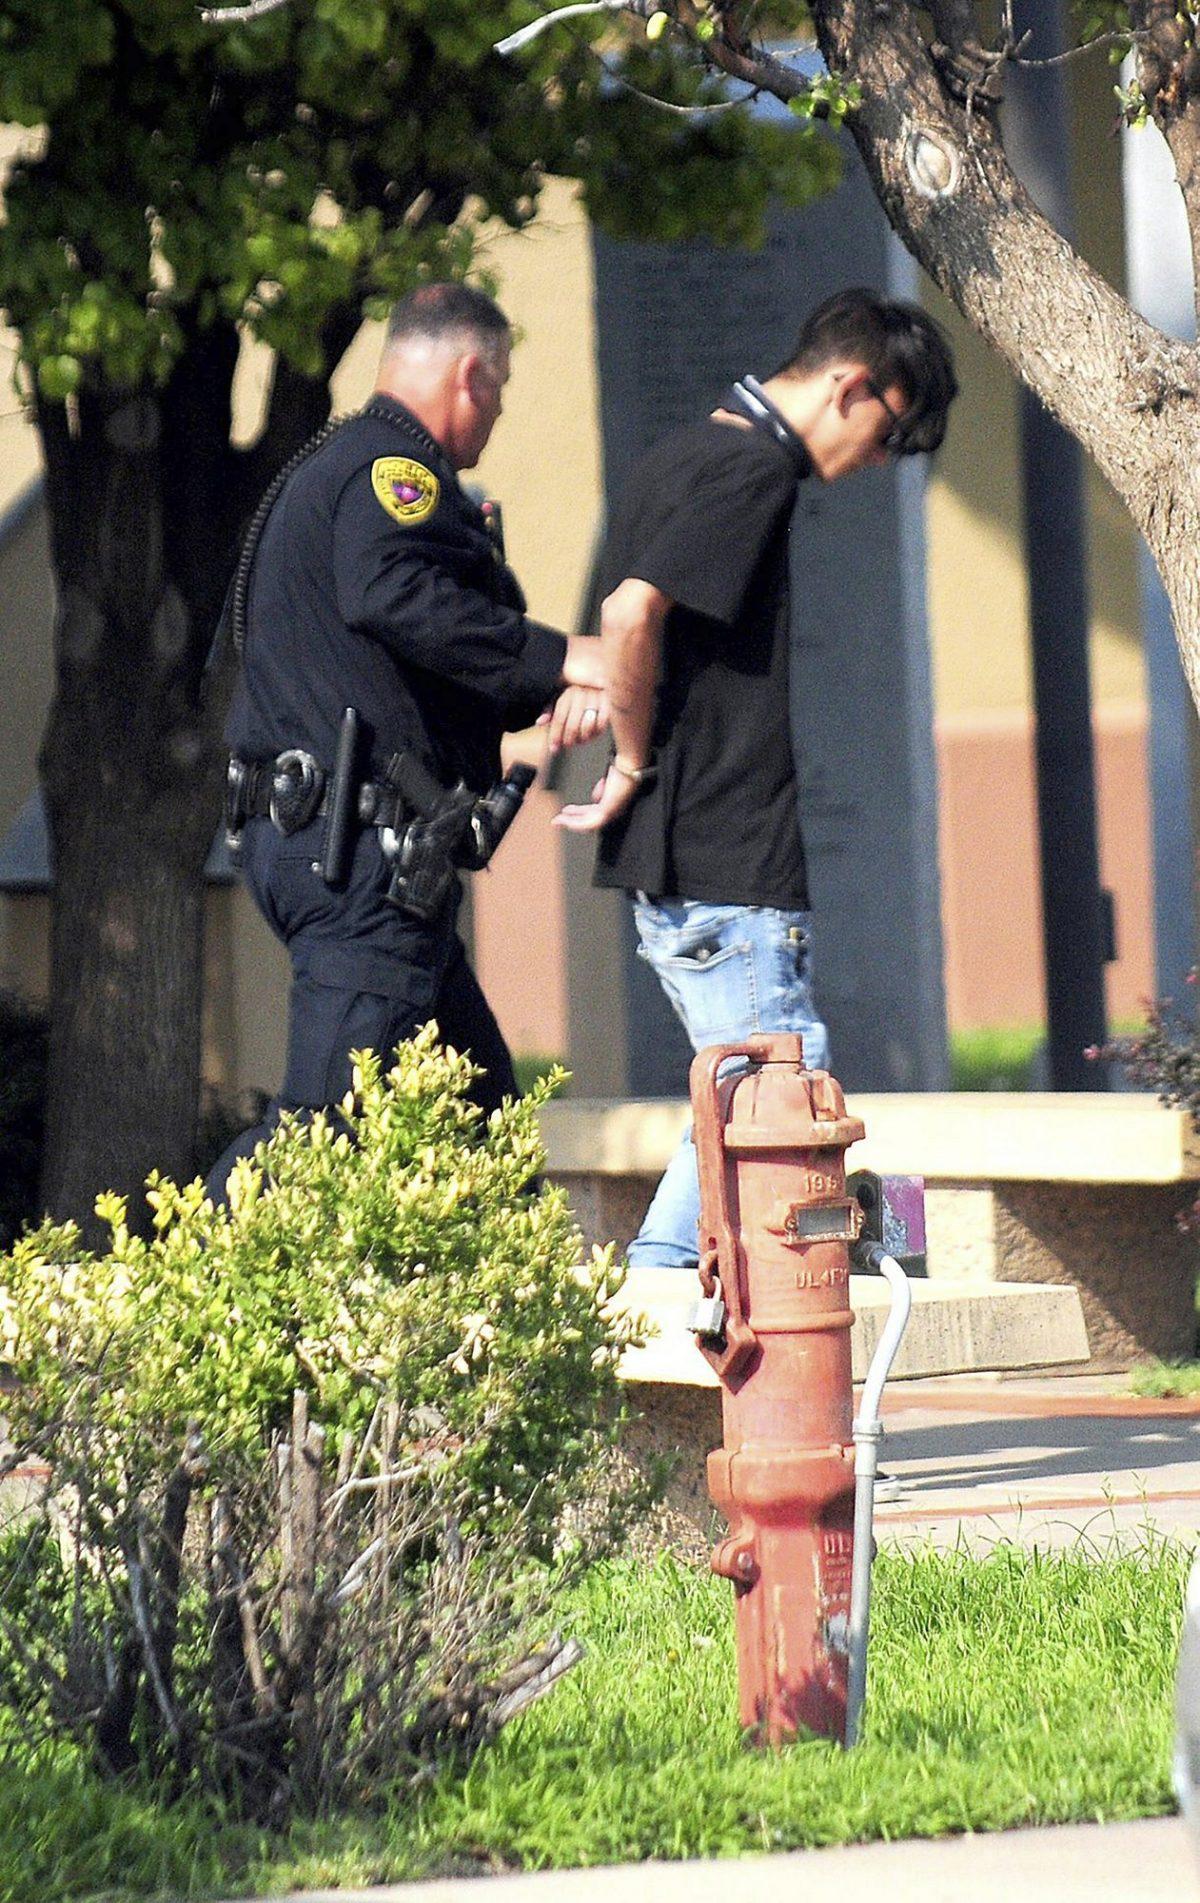 Police take Nathaniel Jouett into custody after a shooting at a public library in the eastern New Mexico community of Clovis. (Tony Bullocks/The Eastern New Mexico News via AP, File)